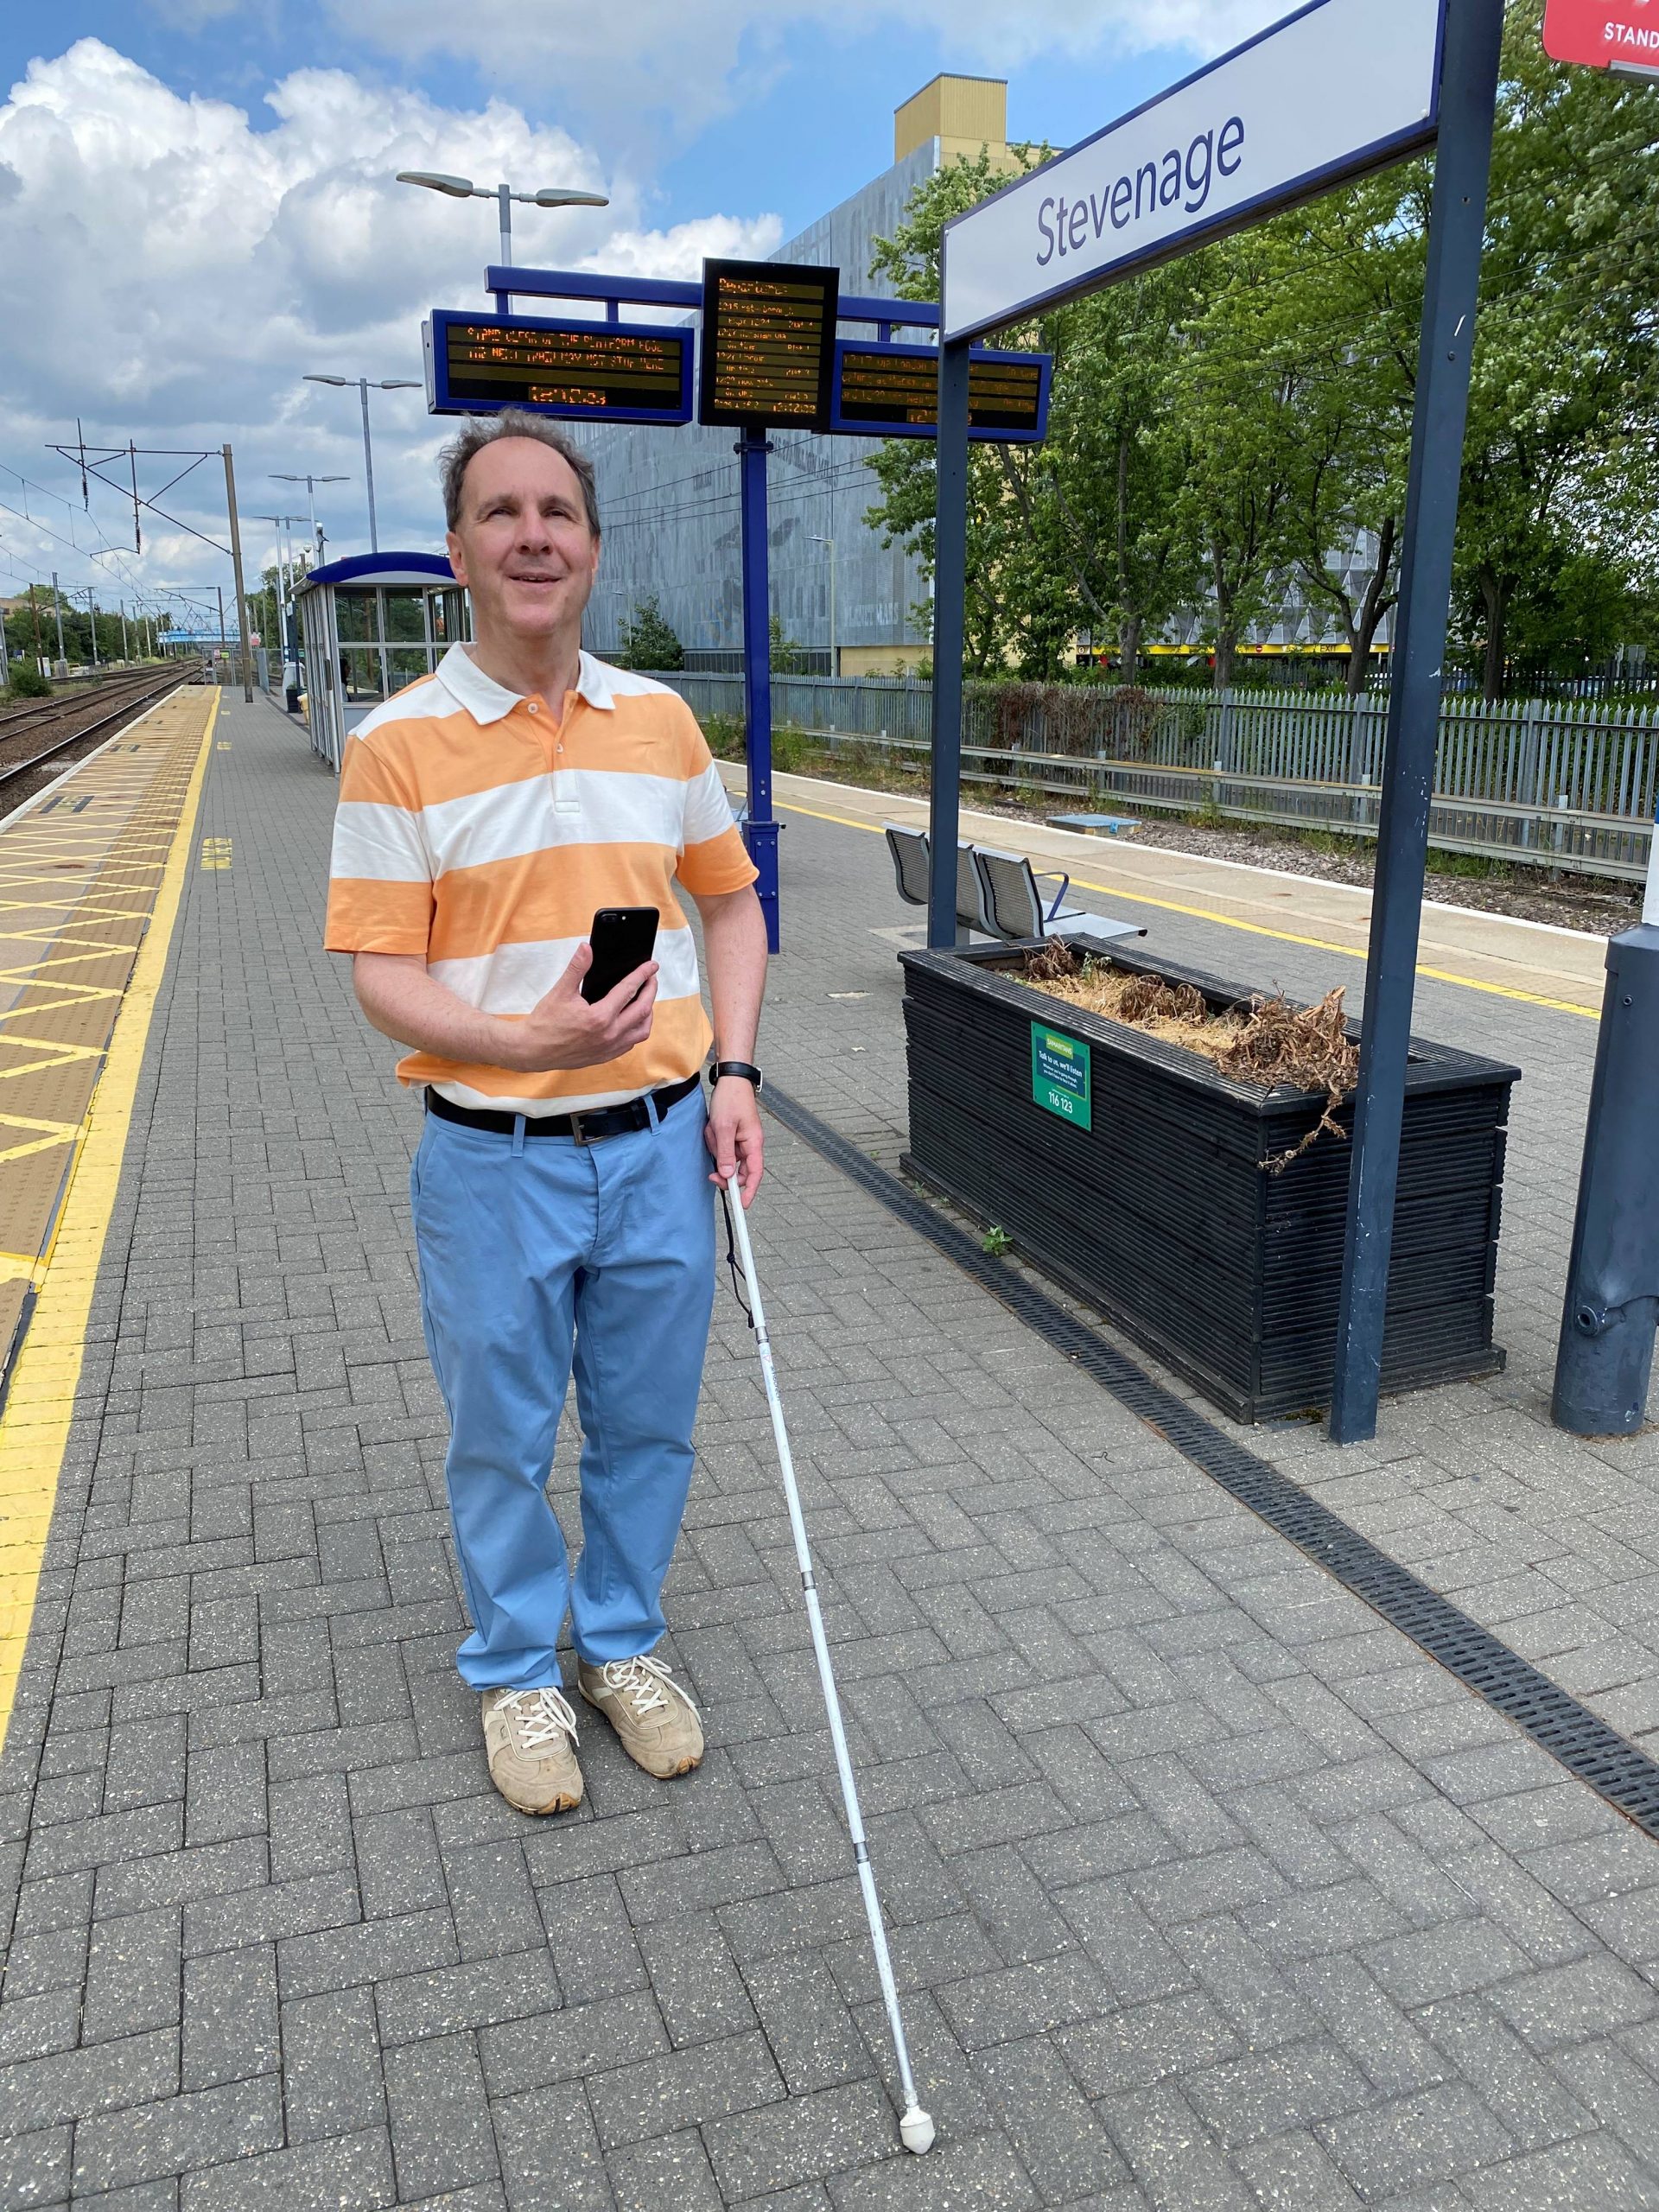 Paul Day, Bedfordshire SLC member, is standing on a platform at Stevenage train station. he is holding his long cane in one hand, and his phone up in the other.